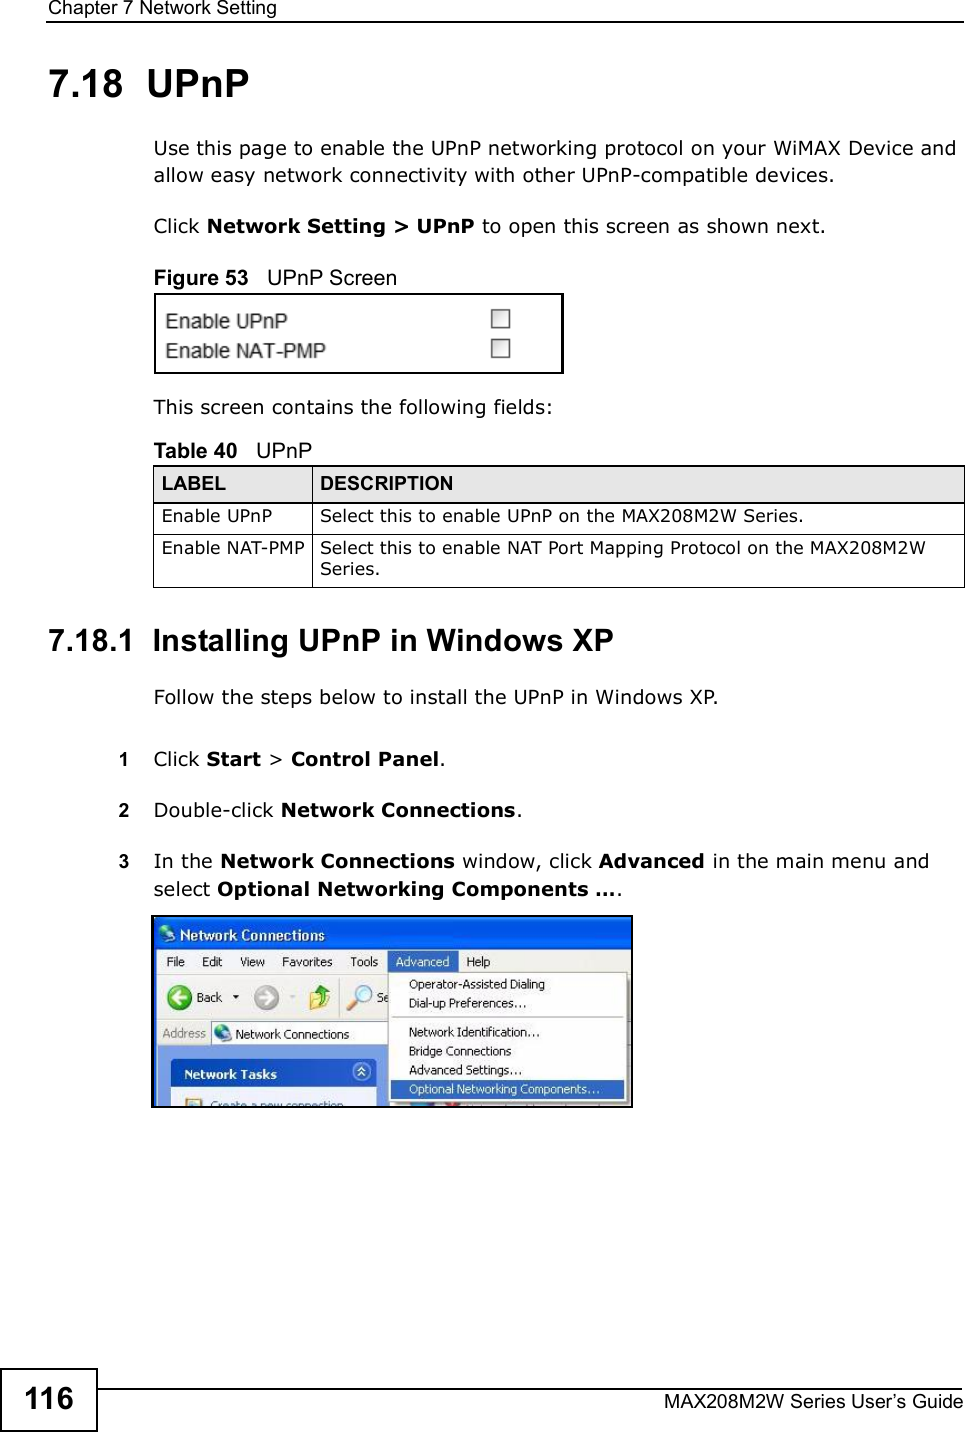 Chapter 7Network SettingMAX208M2W Series User s Guide1167.18  UPnPUse this page to enable the UPnP networking protocol on your WiMAX Device and allow easy network connectivity with other UPnP-compatible devices.Click Network Setting &gt; UPnP to open this screen as shown next.Figure 53   UPnP ScreenThis screen contains the following fields:7.18.1  Installing UPnP in Windows XPFollow the steps below to install the UPnP in Windows XP.1Click Start &gt; Control Panel. 2Double-click Network Connections.3In the Network Connections window, click Advanced in the main menu and select Optional Networking Components  . Table 40   UPnPLABEL DESCRIPTIONEnable UPnPSelect this to enable UPnP on the MAX208M2W Series.Enable NAT-PMPSelect this to enable NAT Port Mapping Protocol on the MAX208M2W Series.